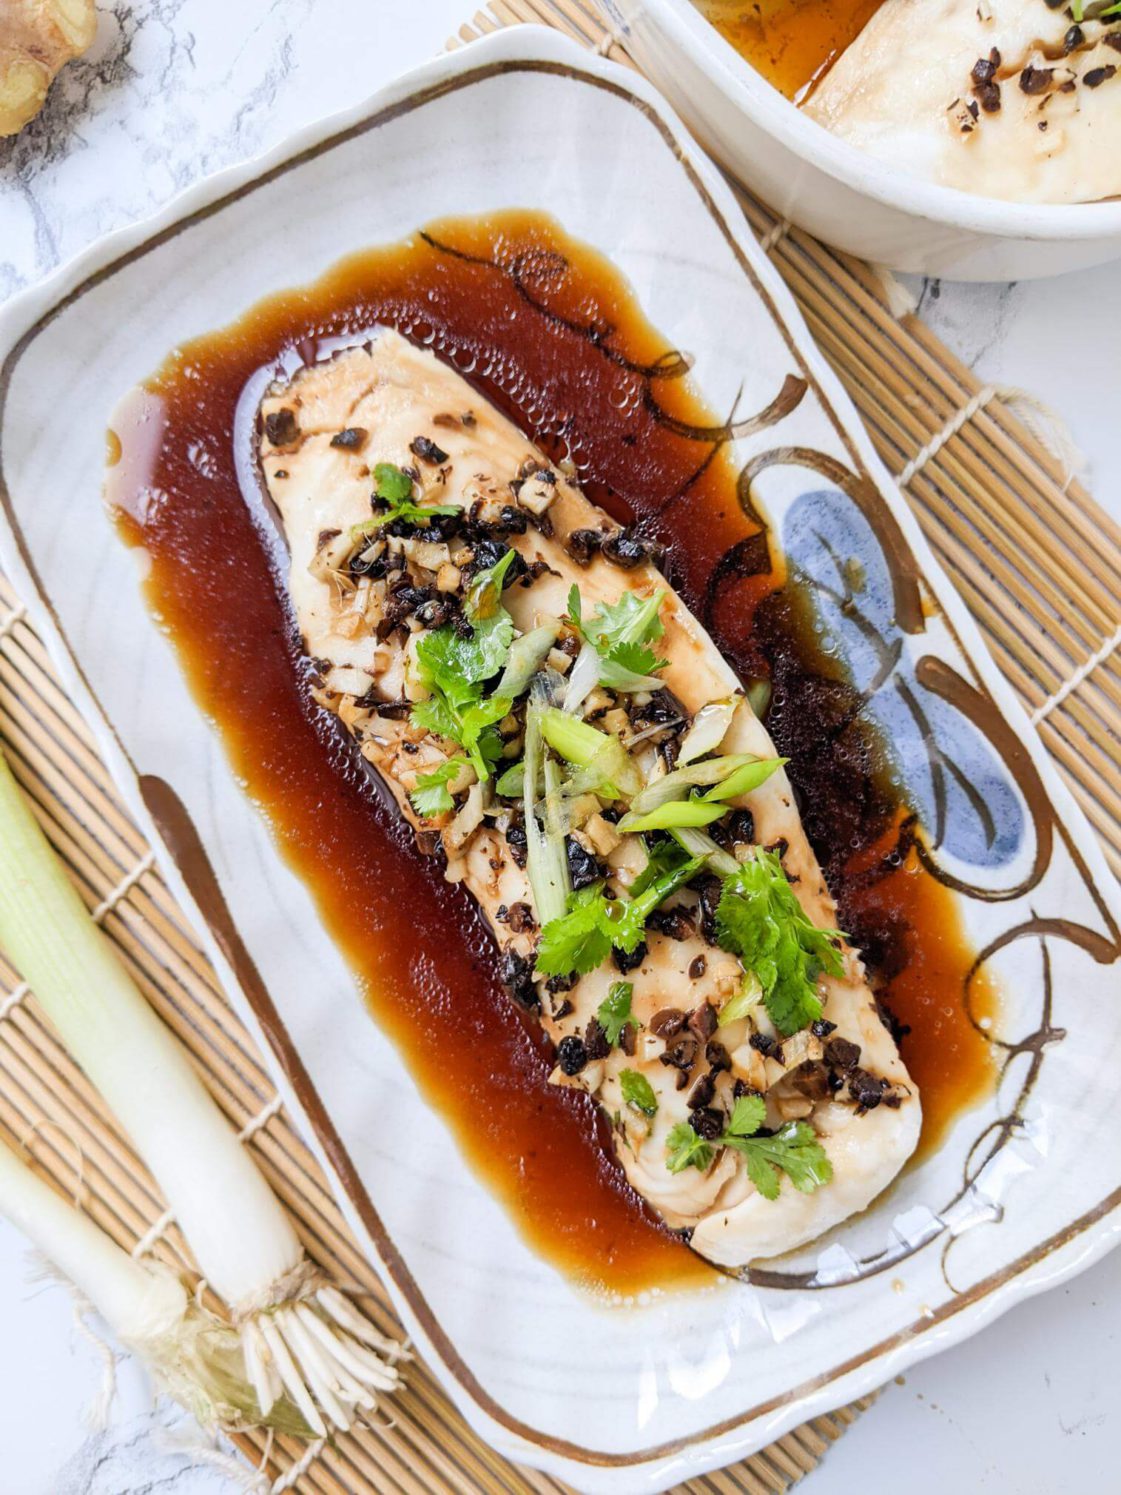 Chinese Steamed Fish Fillets with Black Bean Sauce Recipe Overhead